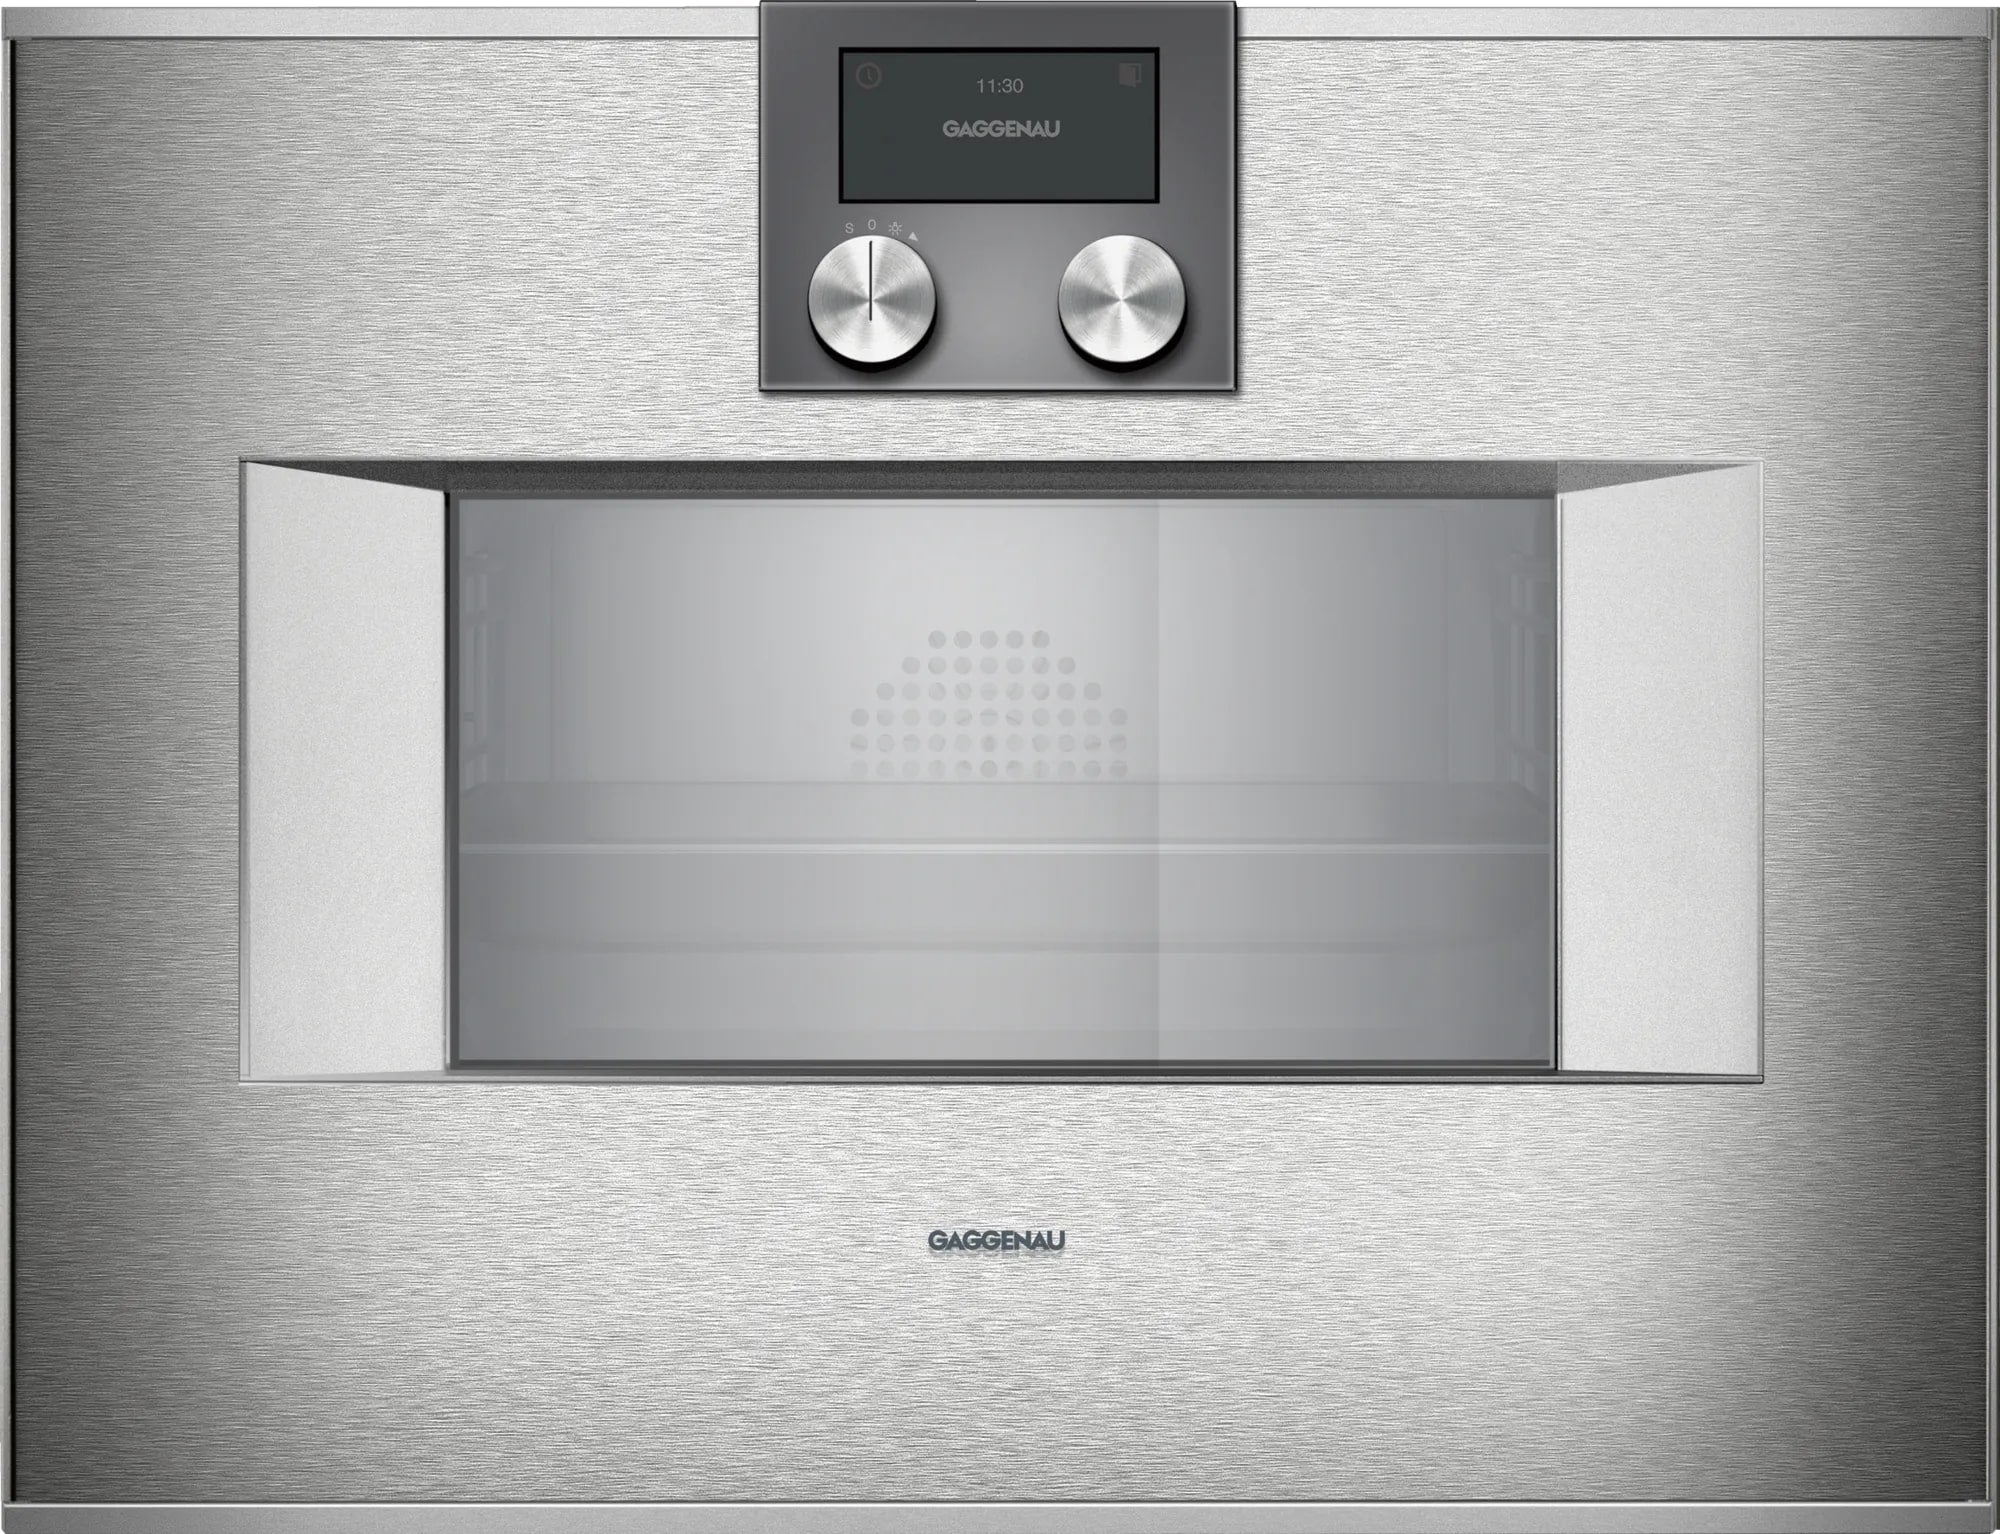 Gaggenau - 2.1 cu. ft Steam Wall Oven in Stainless (Open Box) - BS470612